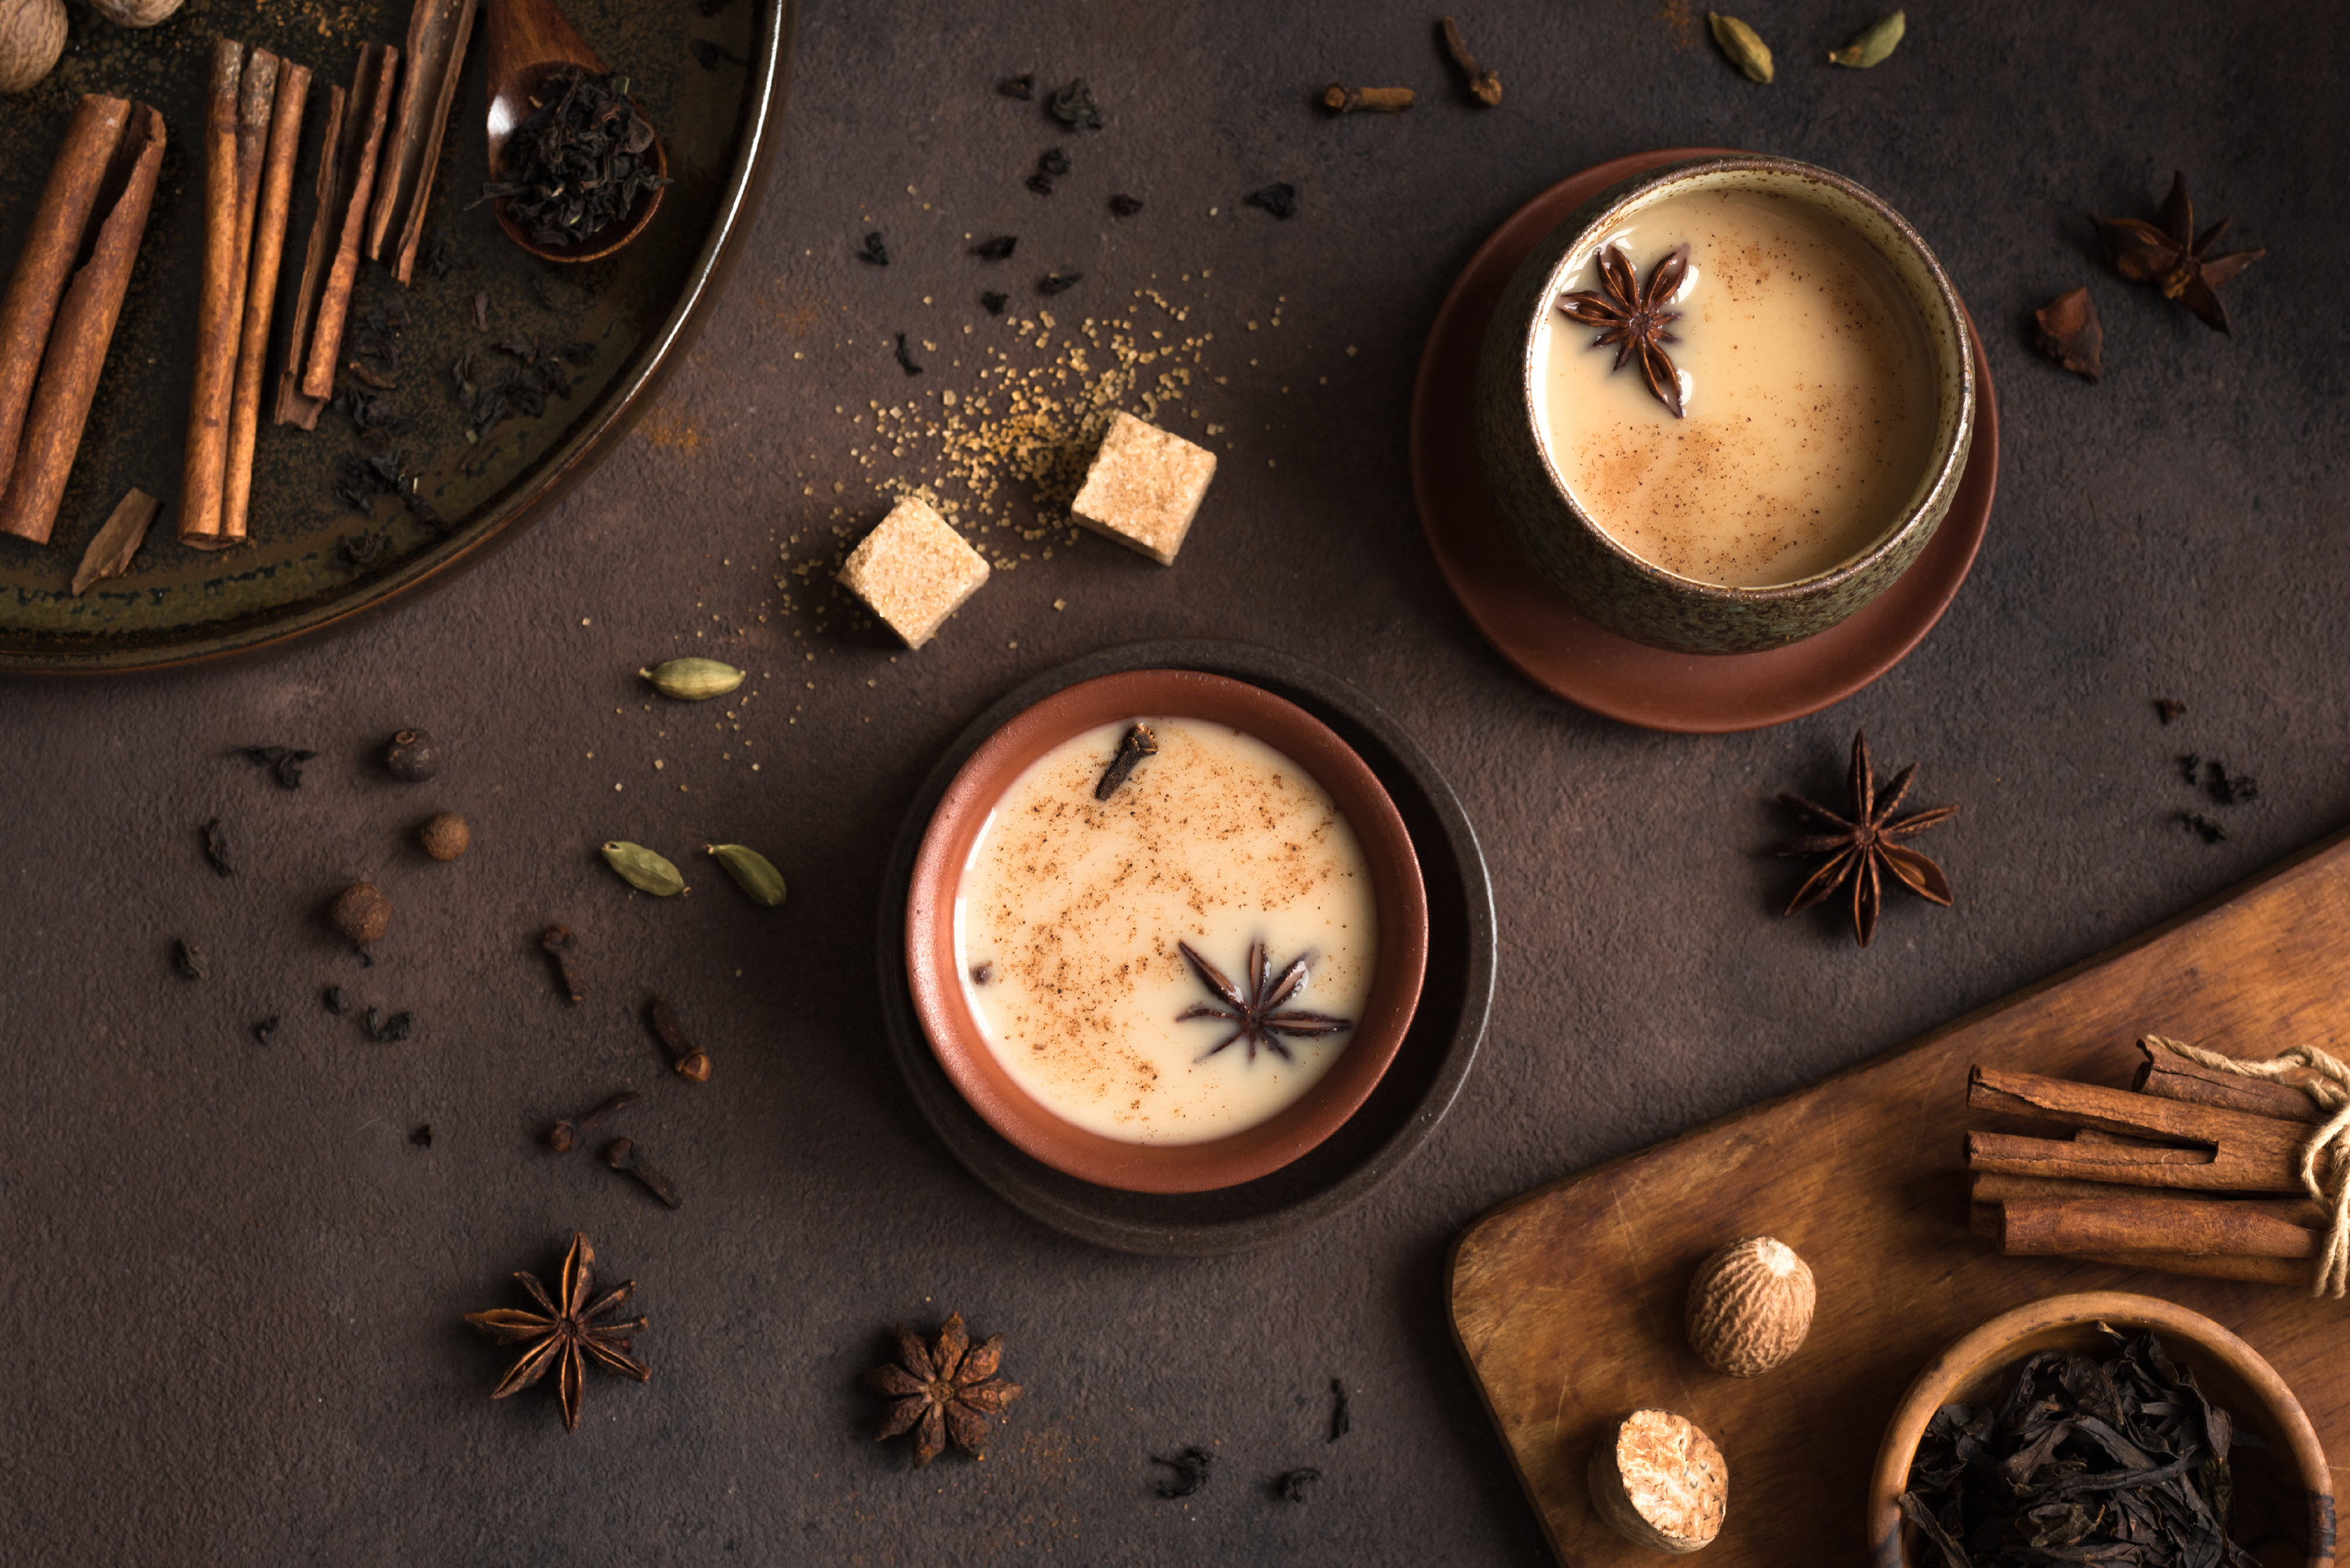 A cup of chai surrounded by ingredients like star anise and cinnamon sticks and contrasted against a dark grayish-purple background.